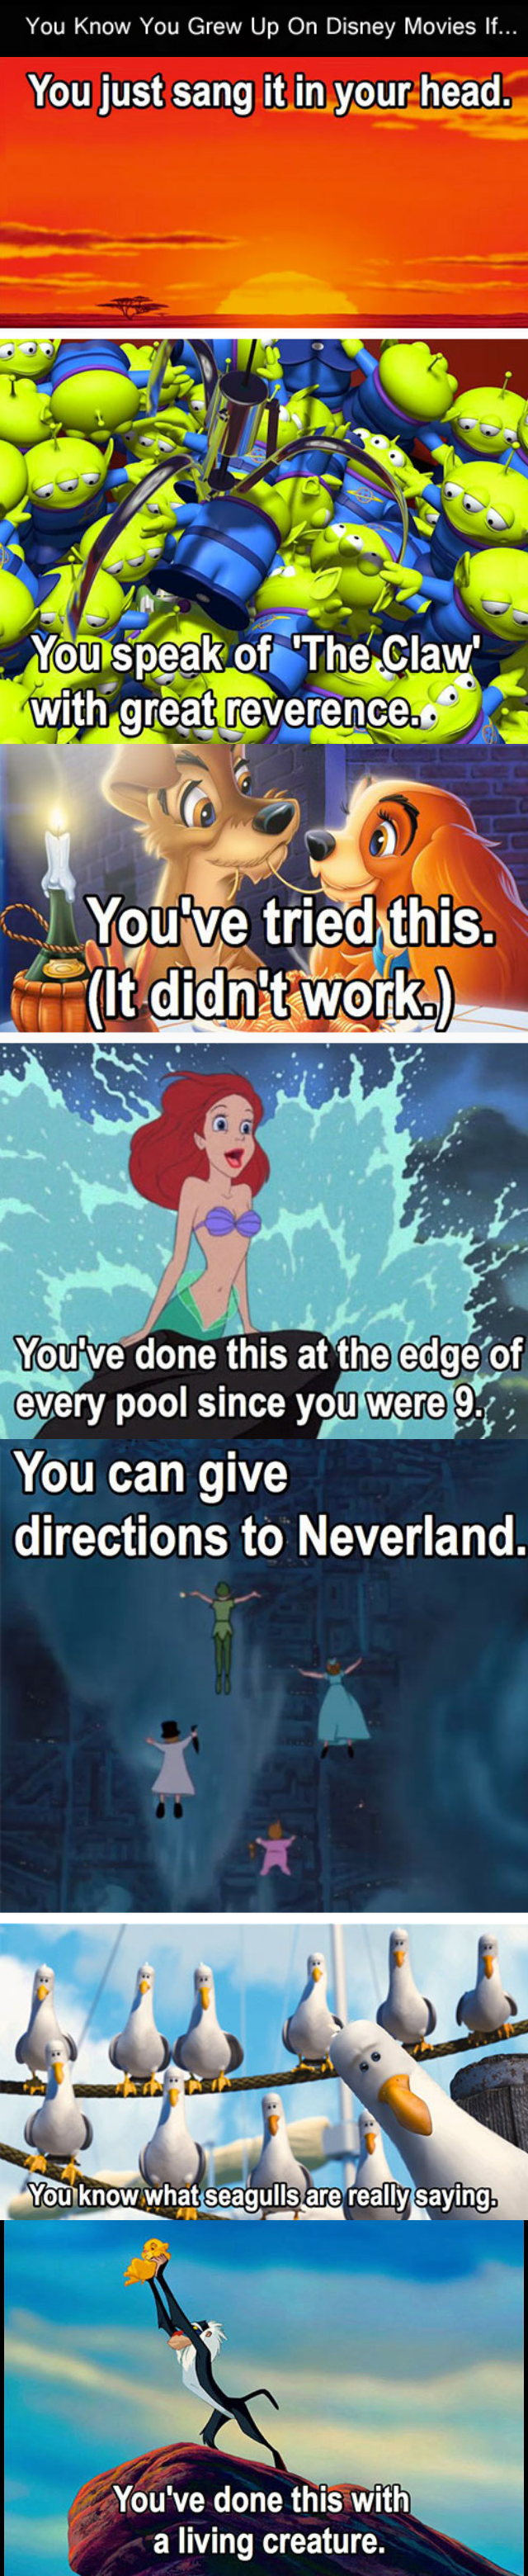 Are+you+a+Disney+fan+Part+2.+Well+slap+my_37477e_4662655.png